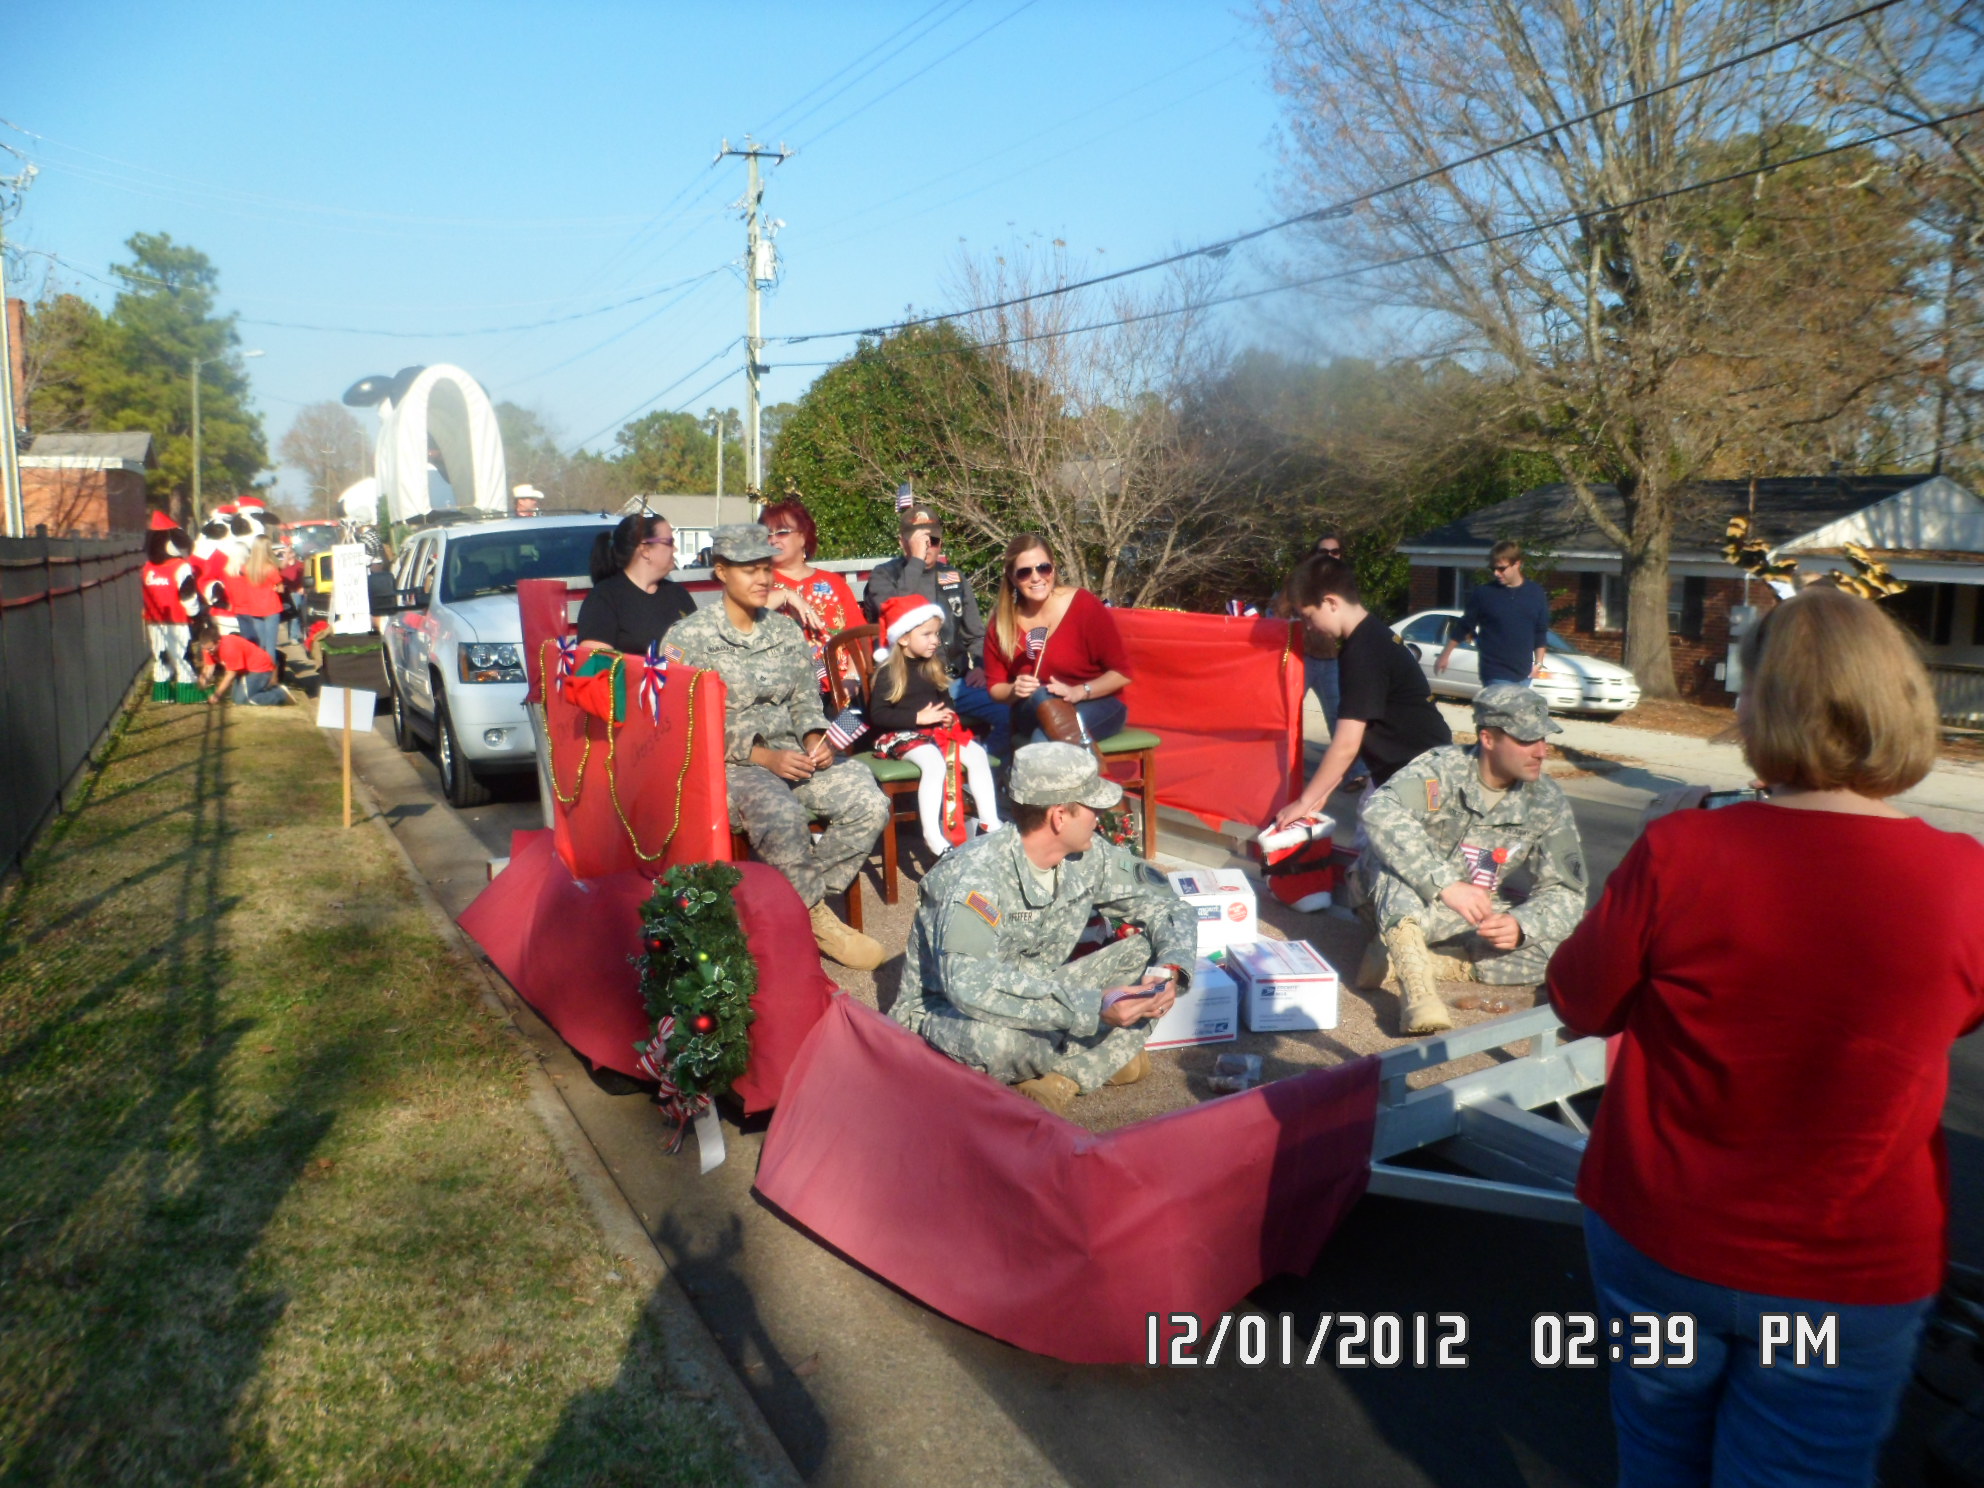 Pix of our VFW Parade float